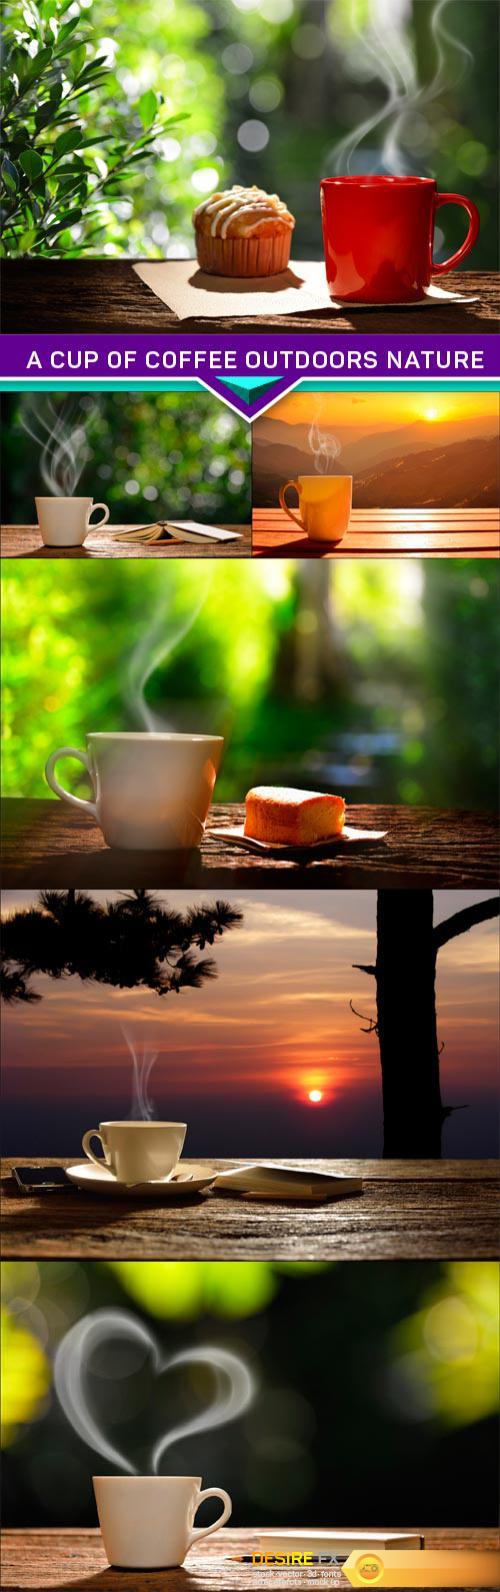 A cup of coffee outdoors nature 6X JPEG